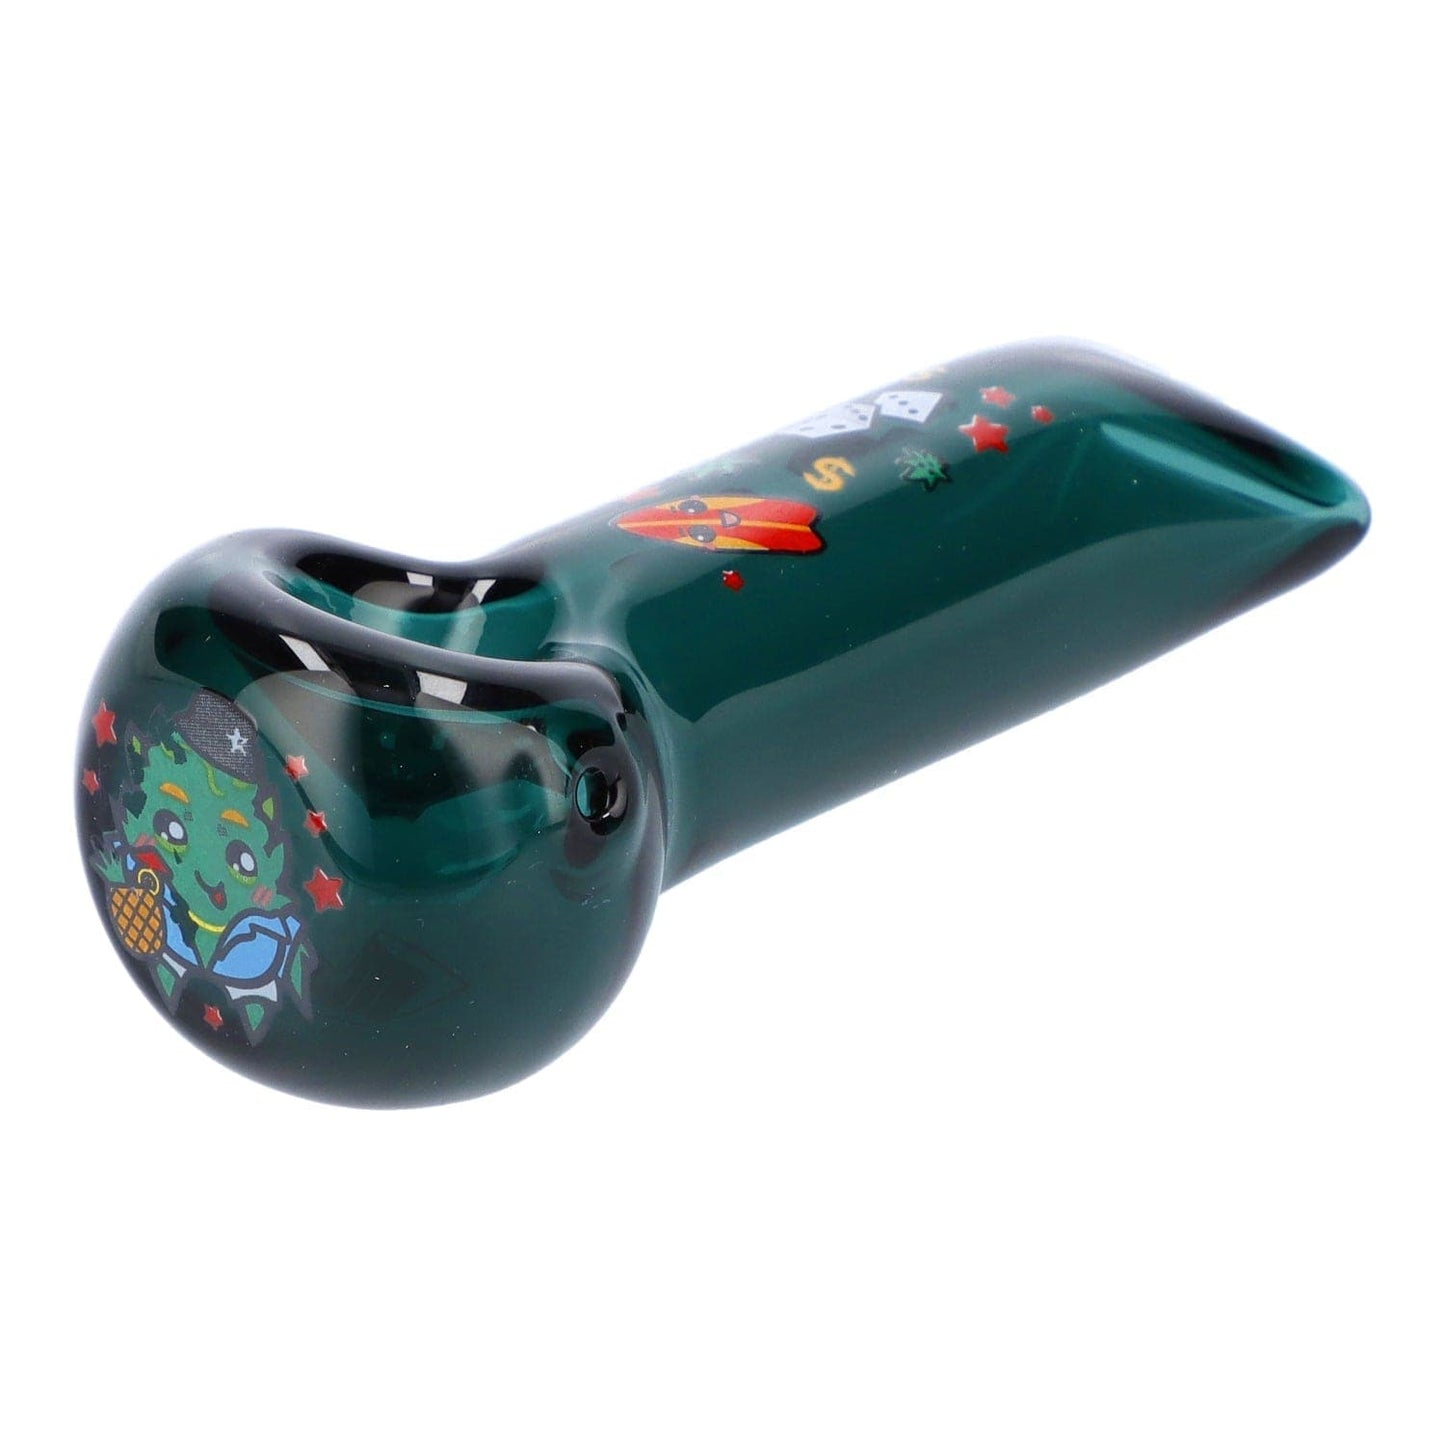 Wido Hand Pipe 4" Pineapple Express Hand Pipe - Transparent Teal